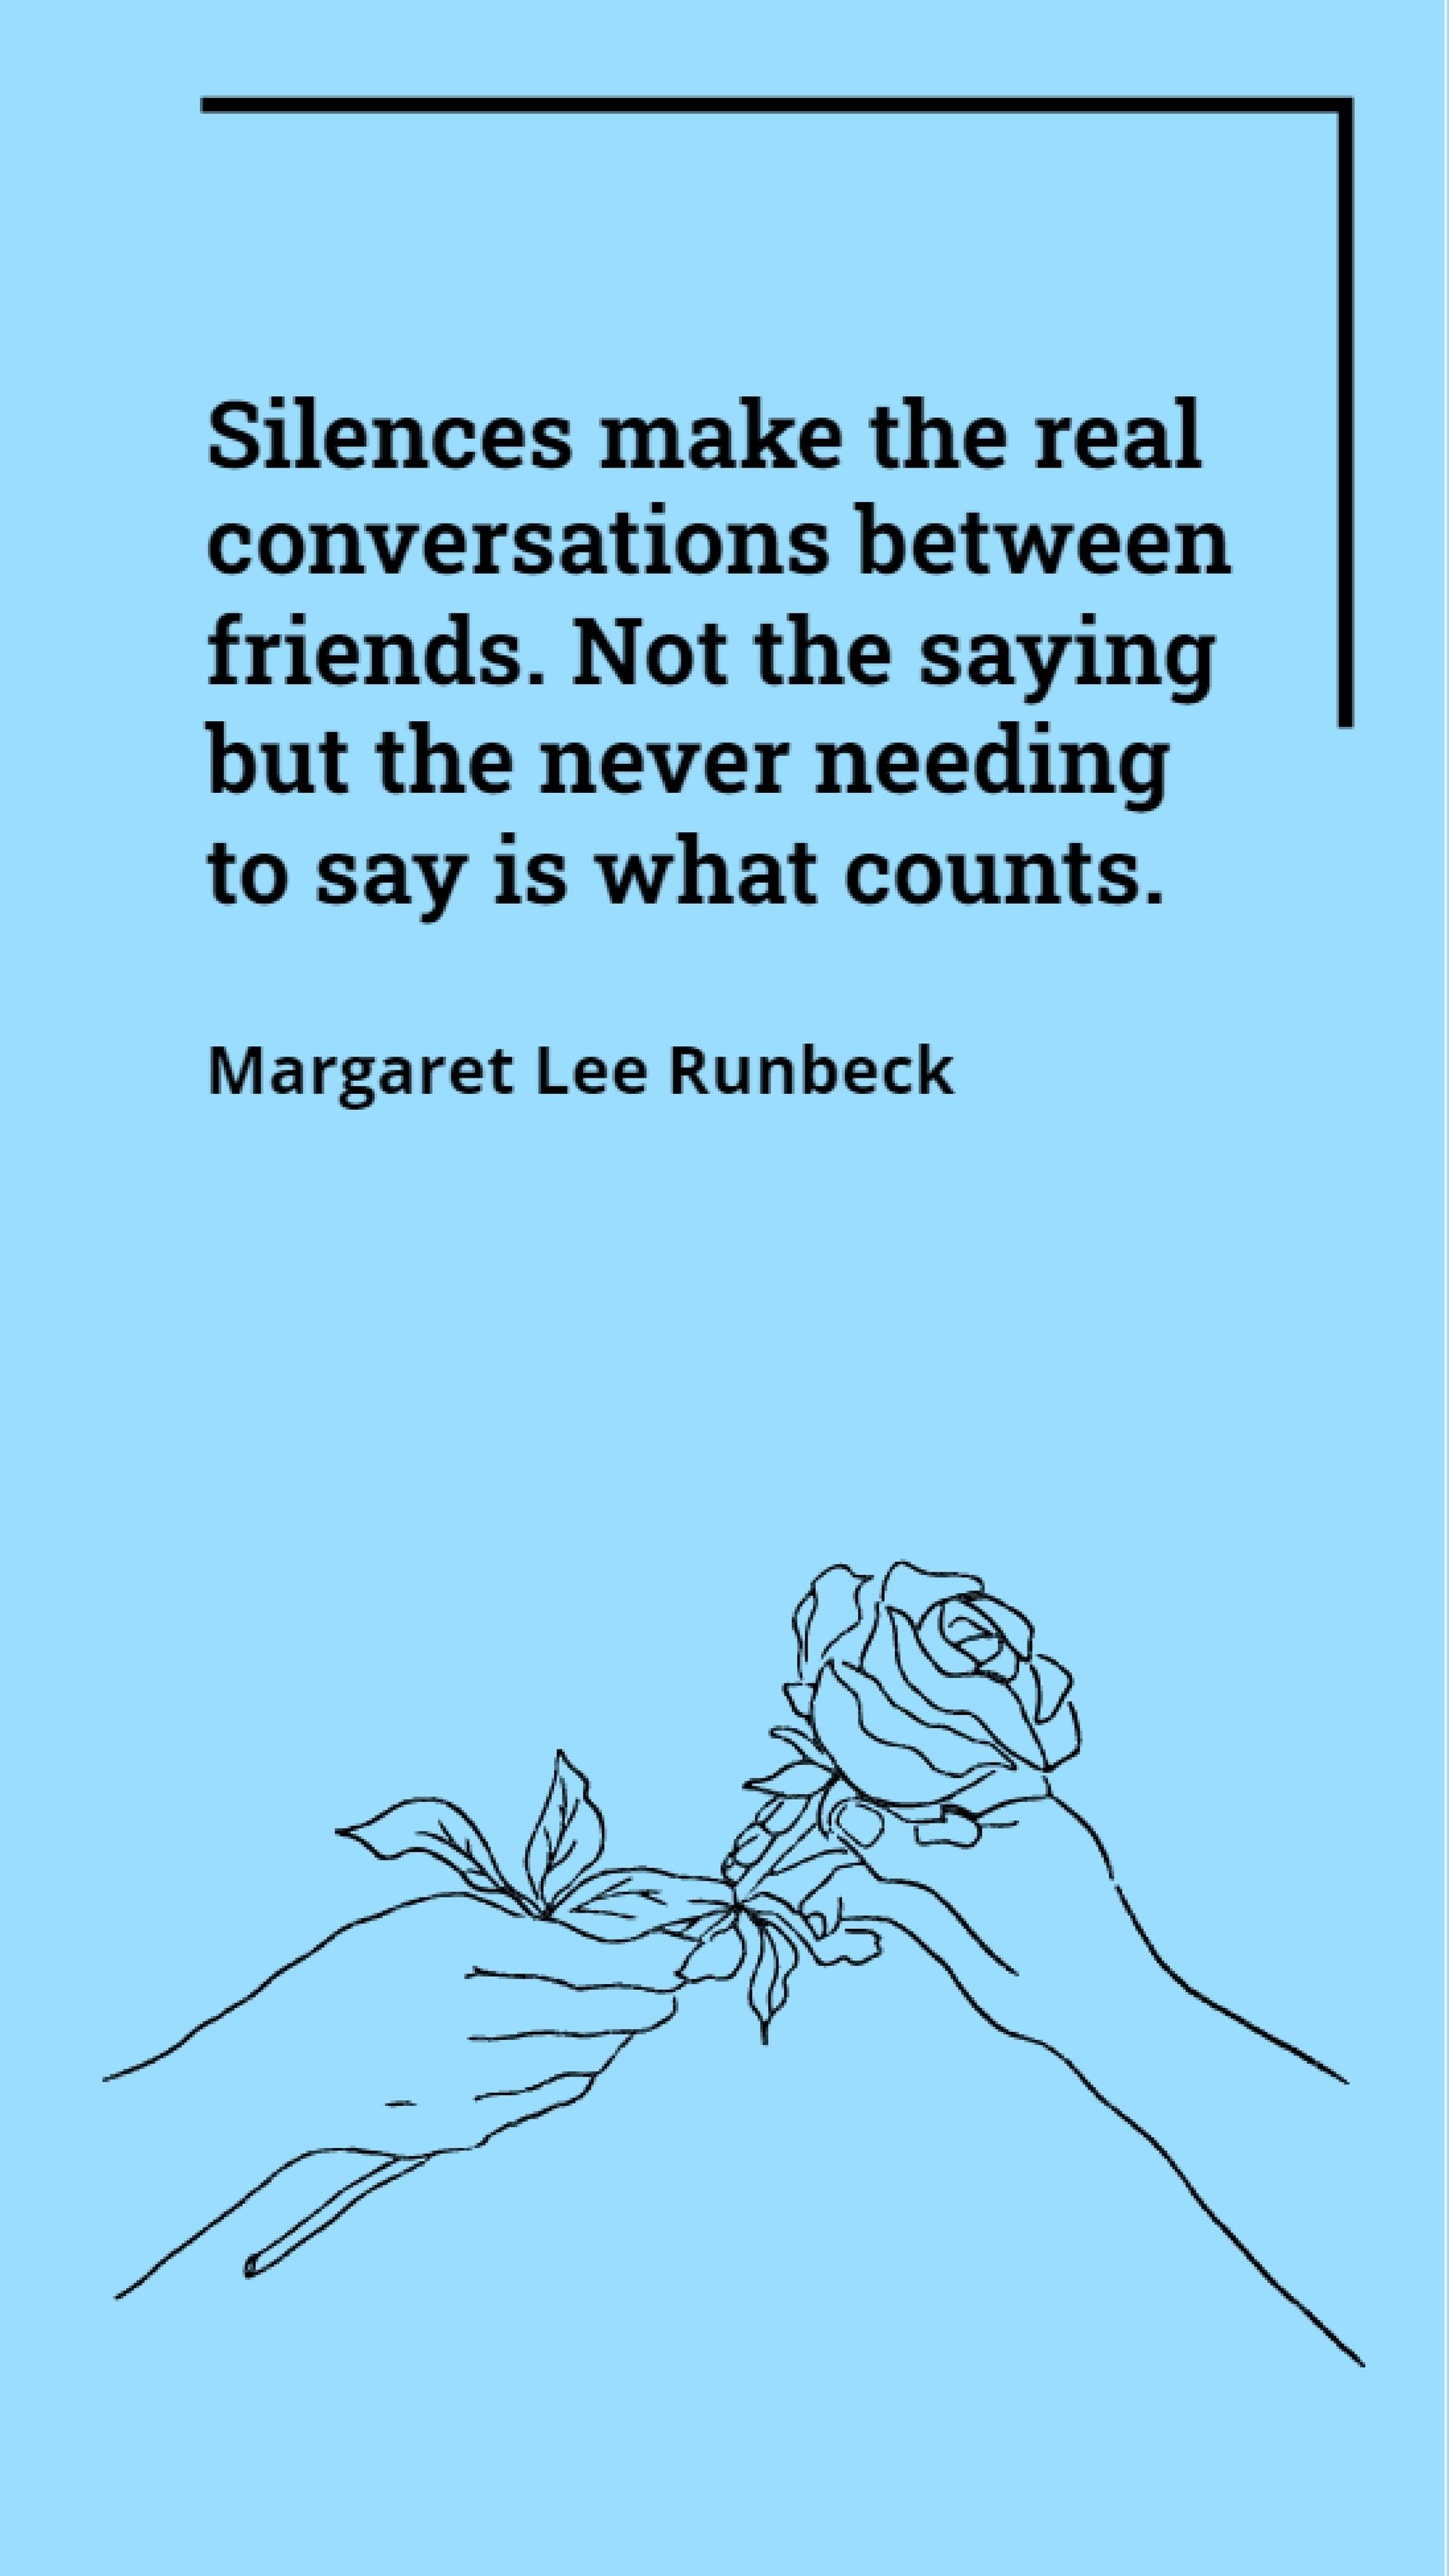 Margaret Lee Runbeck - Silences make the real conversations between friends. Not the saying but the never needing to say is what counts. Template